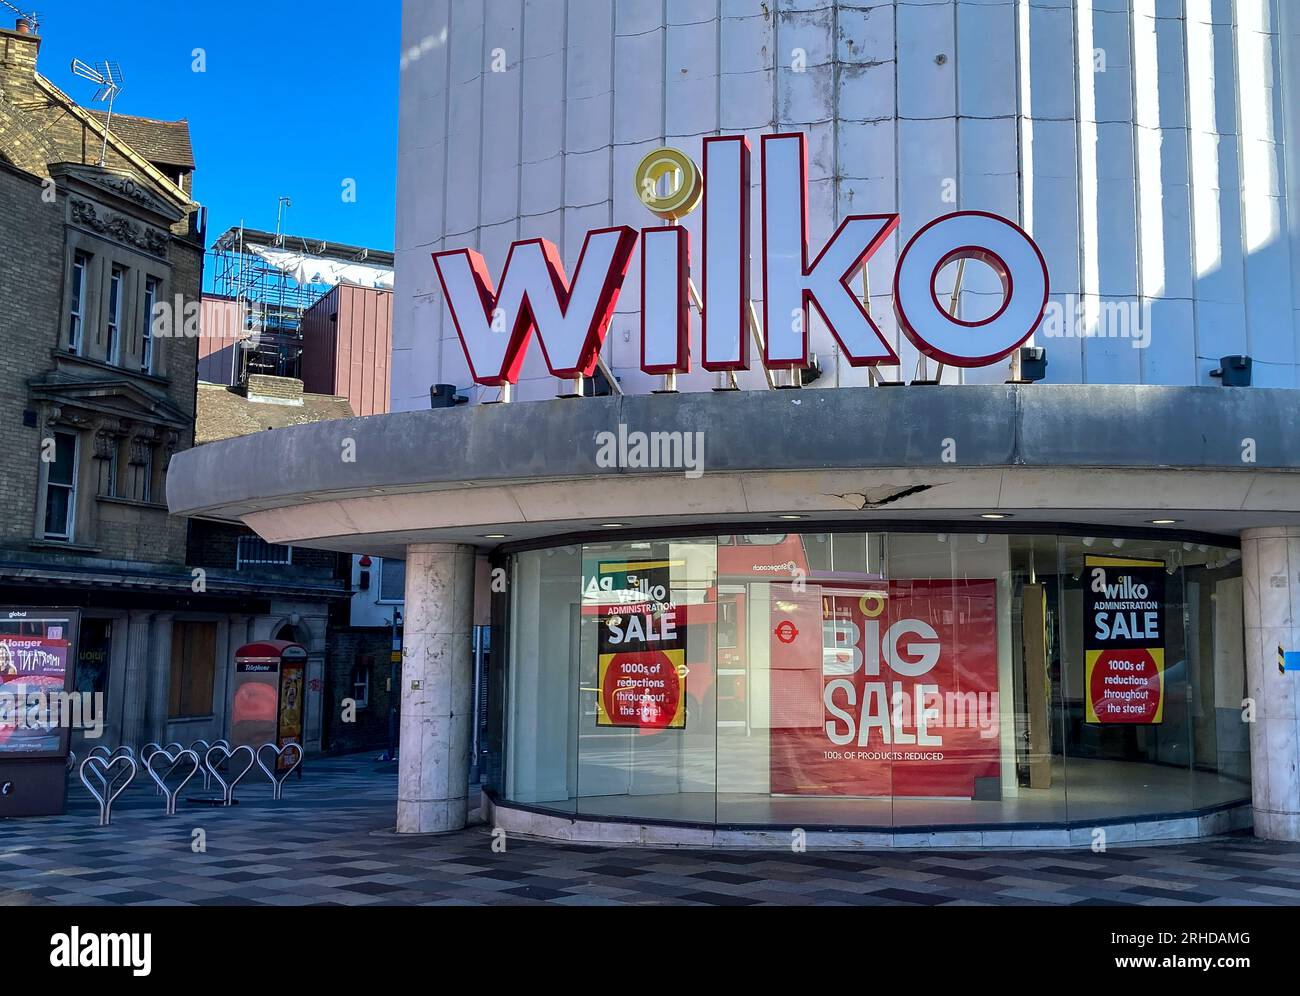 General view of a Wilko store in Ilford, London as the chain launches an administration sale with prices slashed on thousands of products. Stock Photo